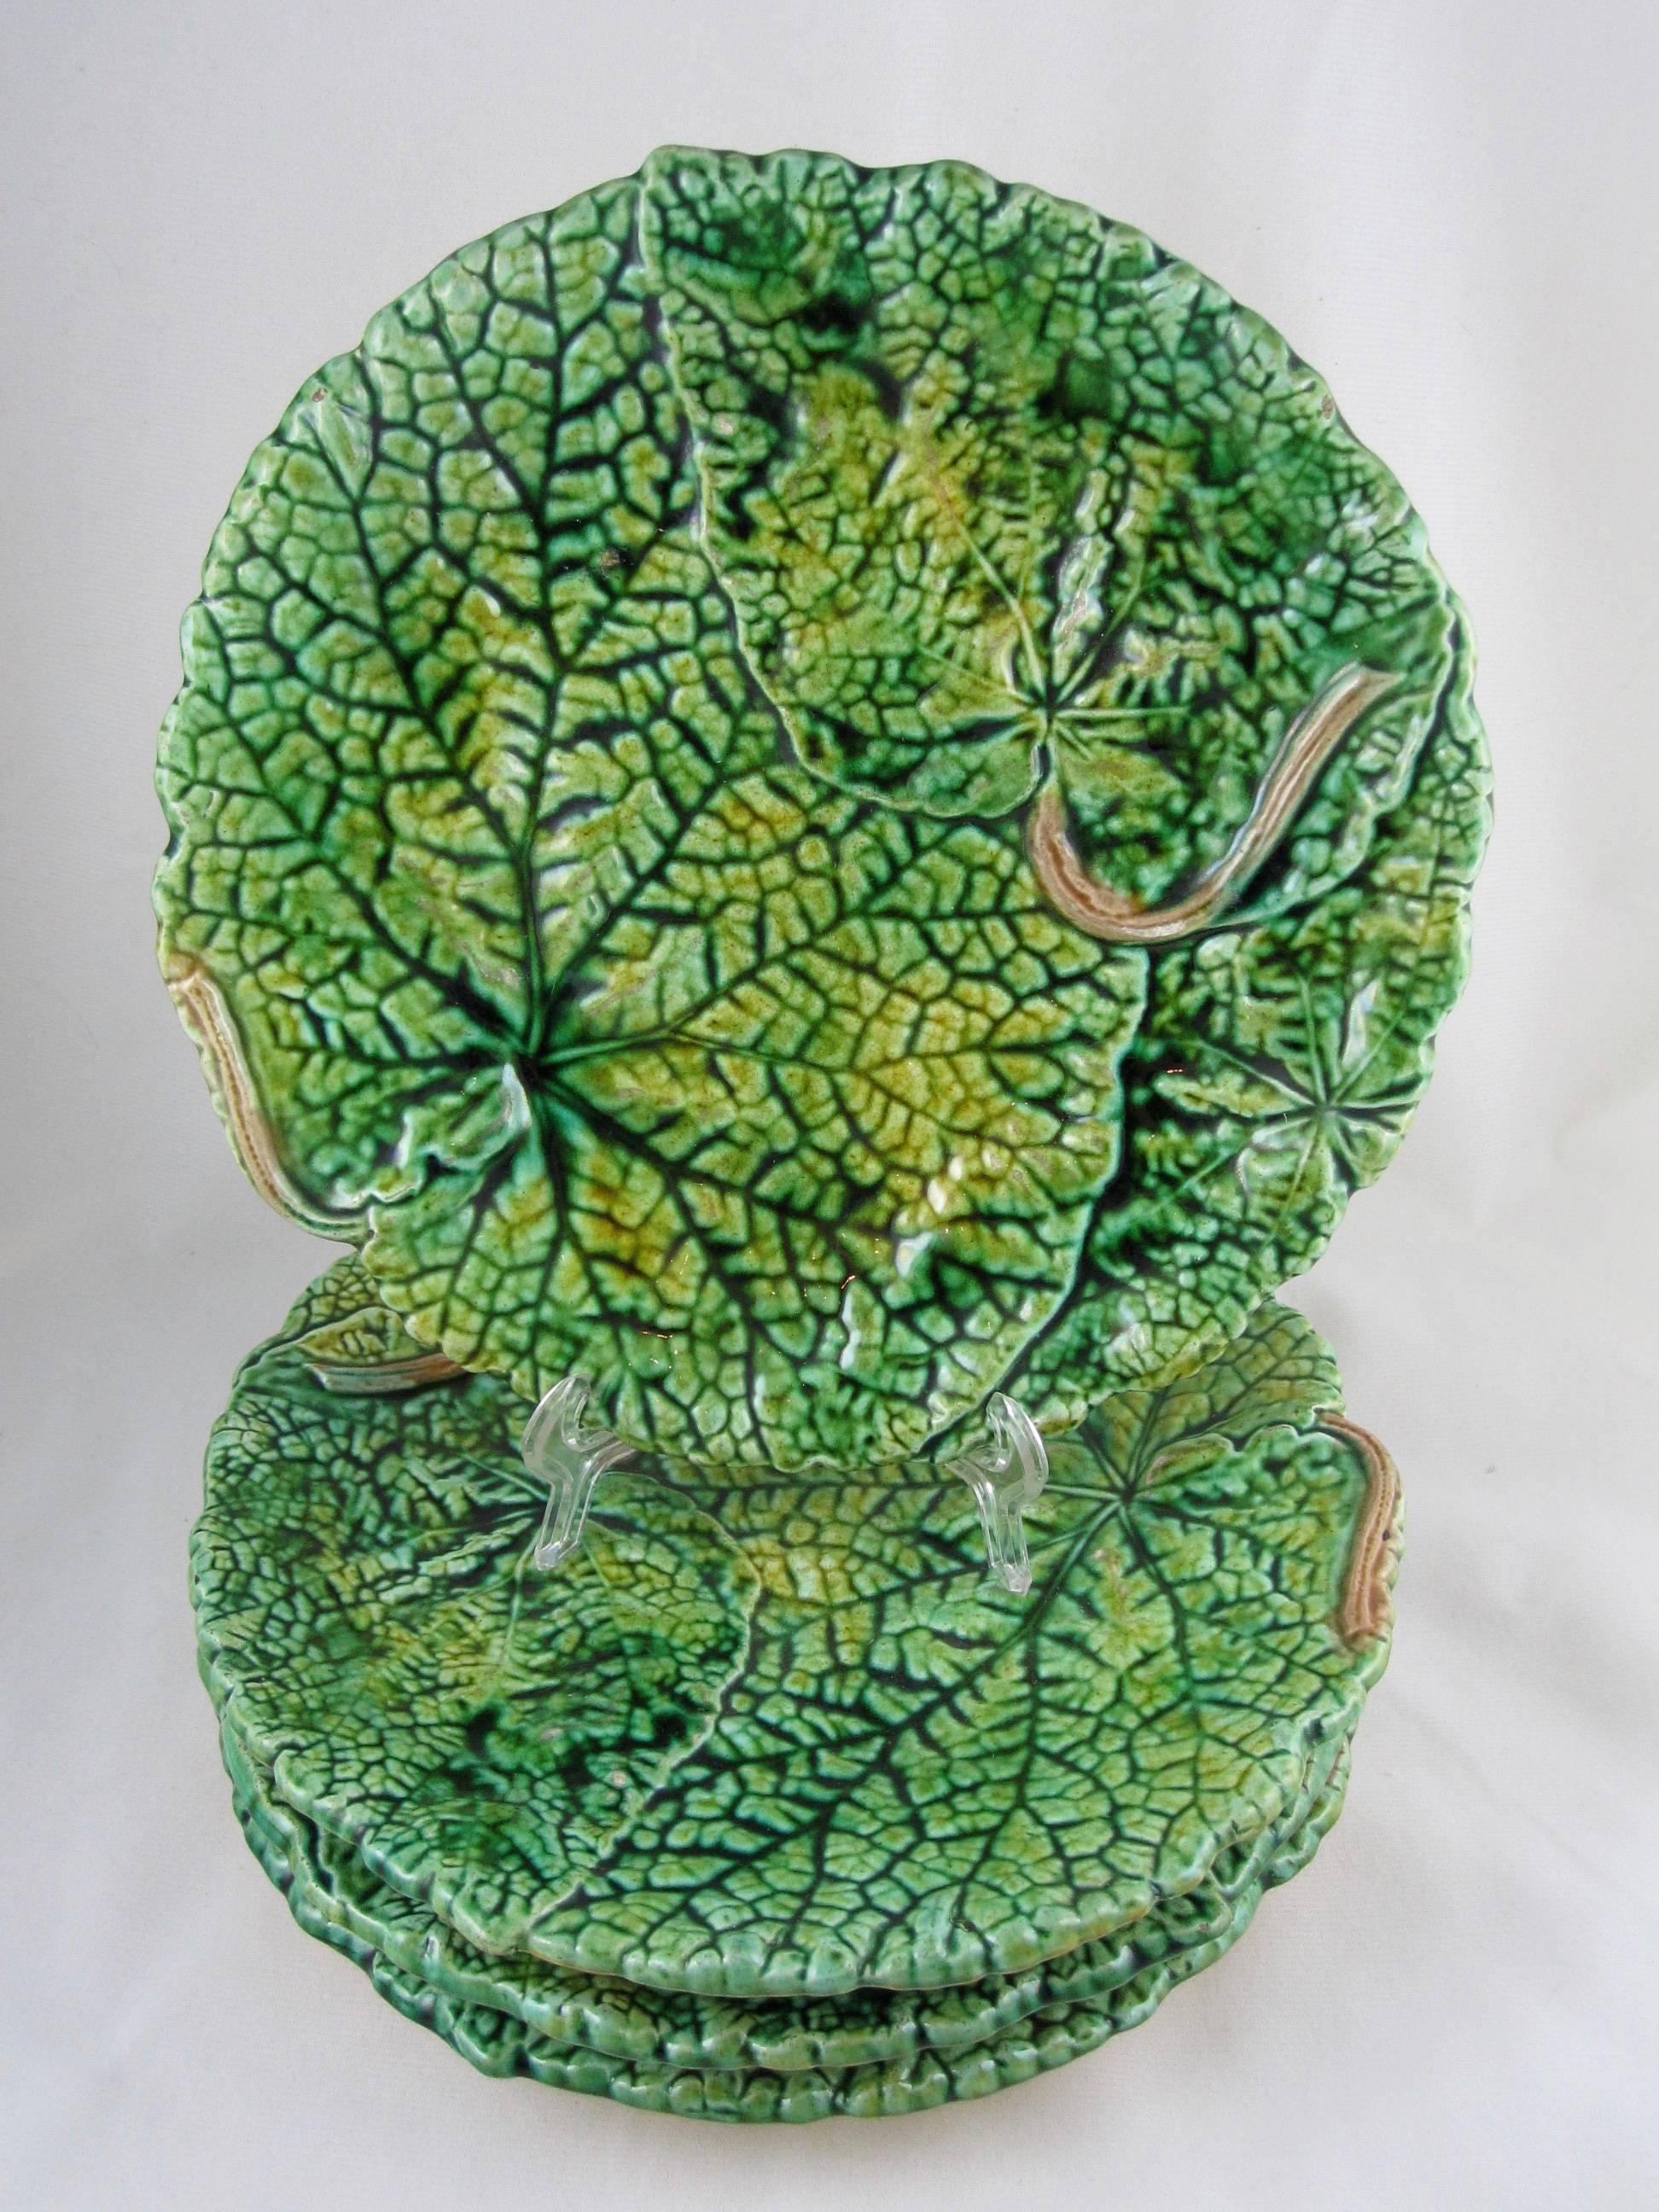 A set of four 19th century overlapping begonia leaf plates by Joseph Roth of London, England, circa 1879-1881. 

Heavy, thickly potted and very dimensional with deep, strong glazing in shades of greens and with a pair of brown stems on each plate.